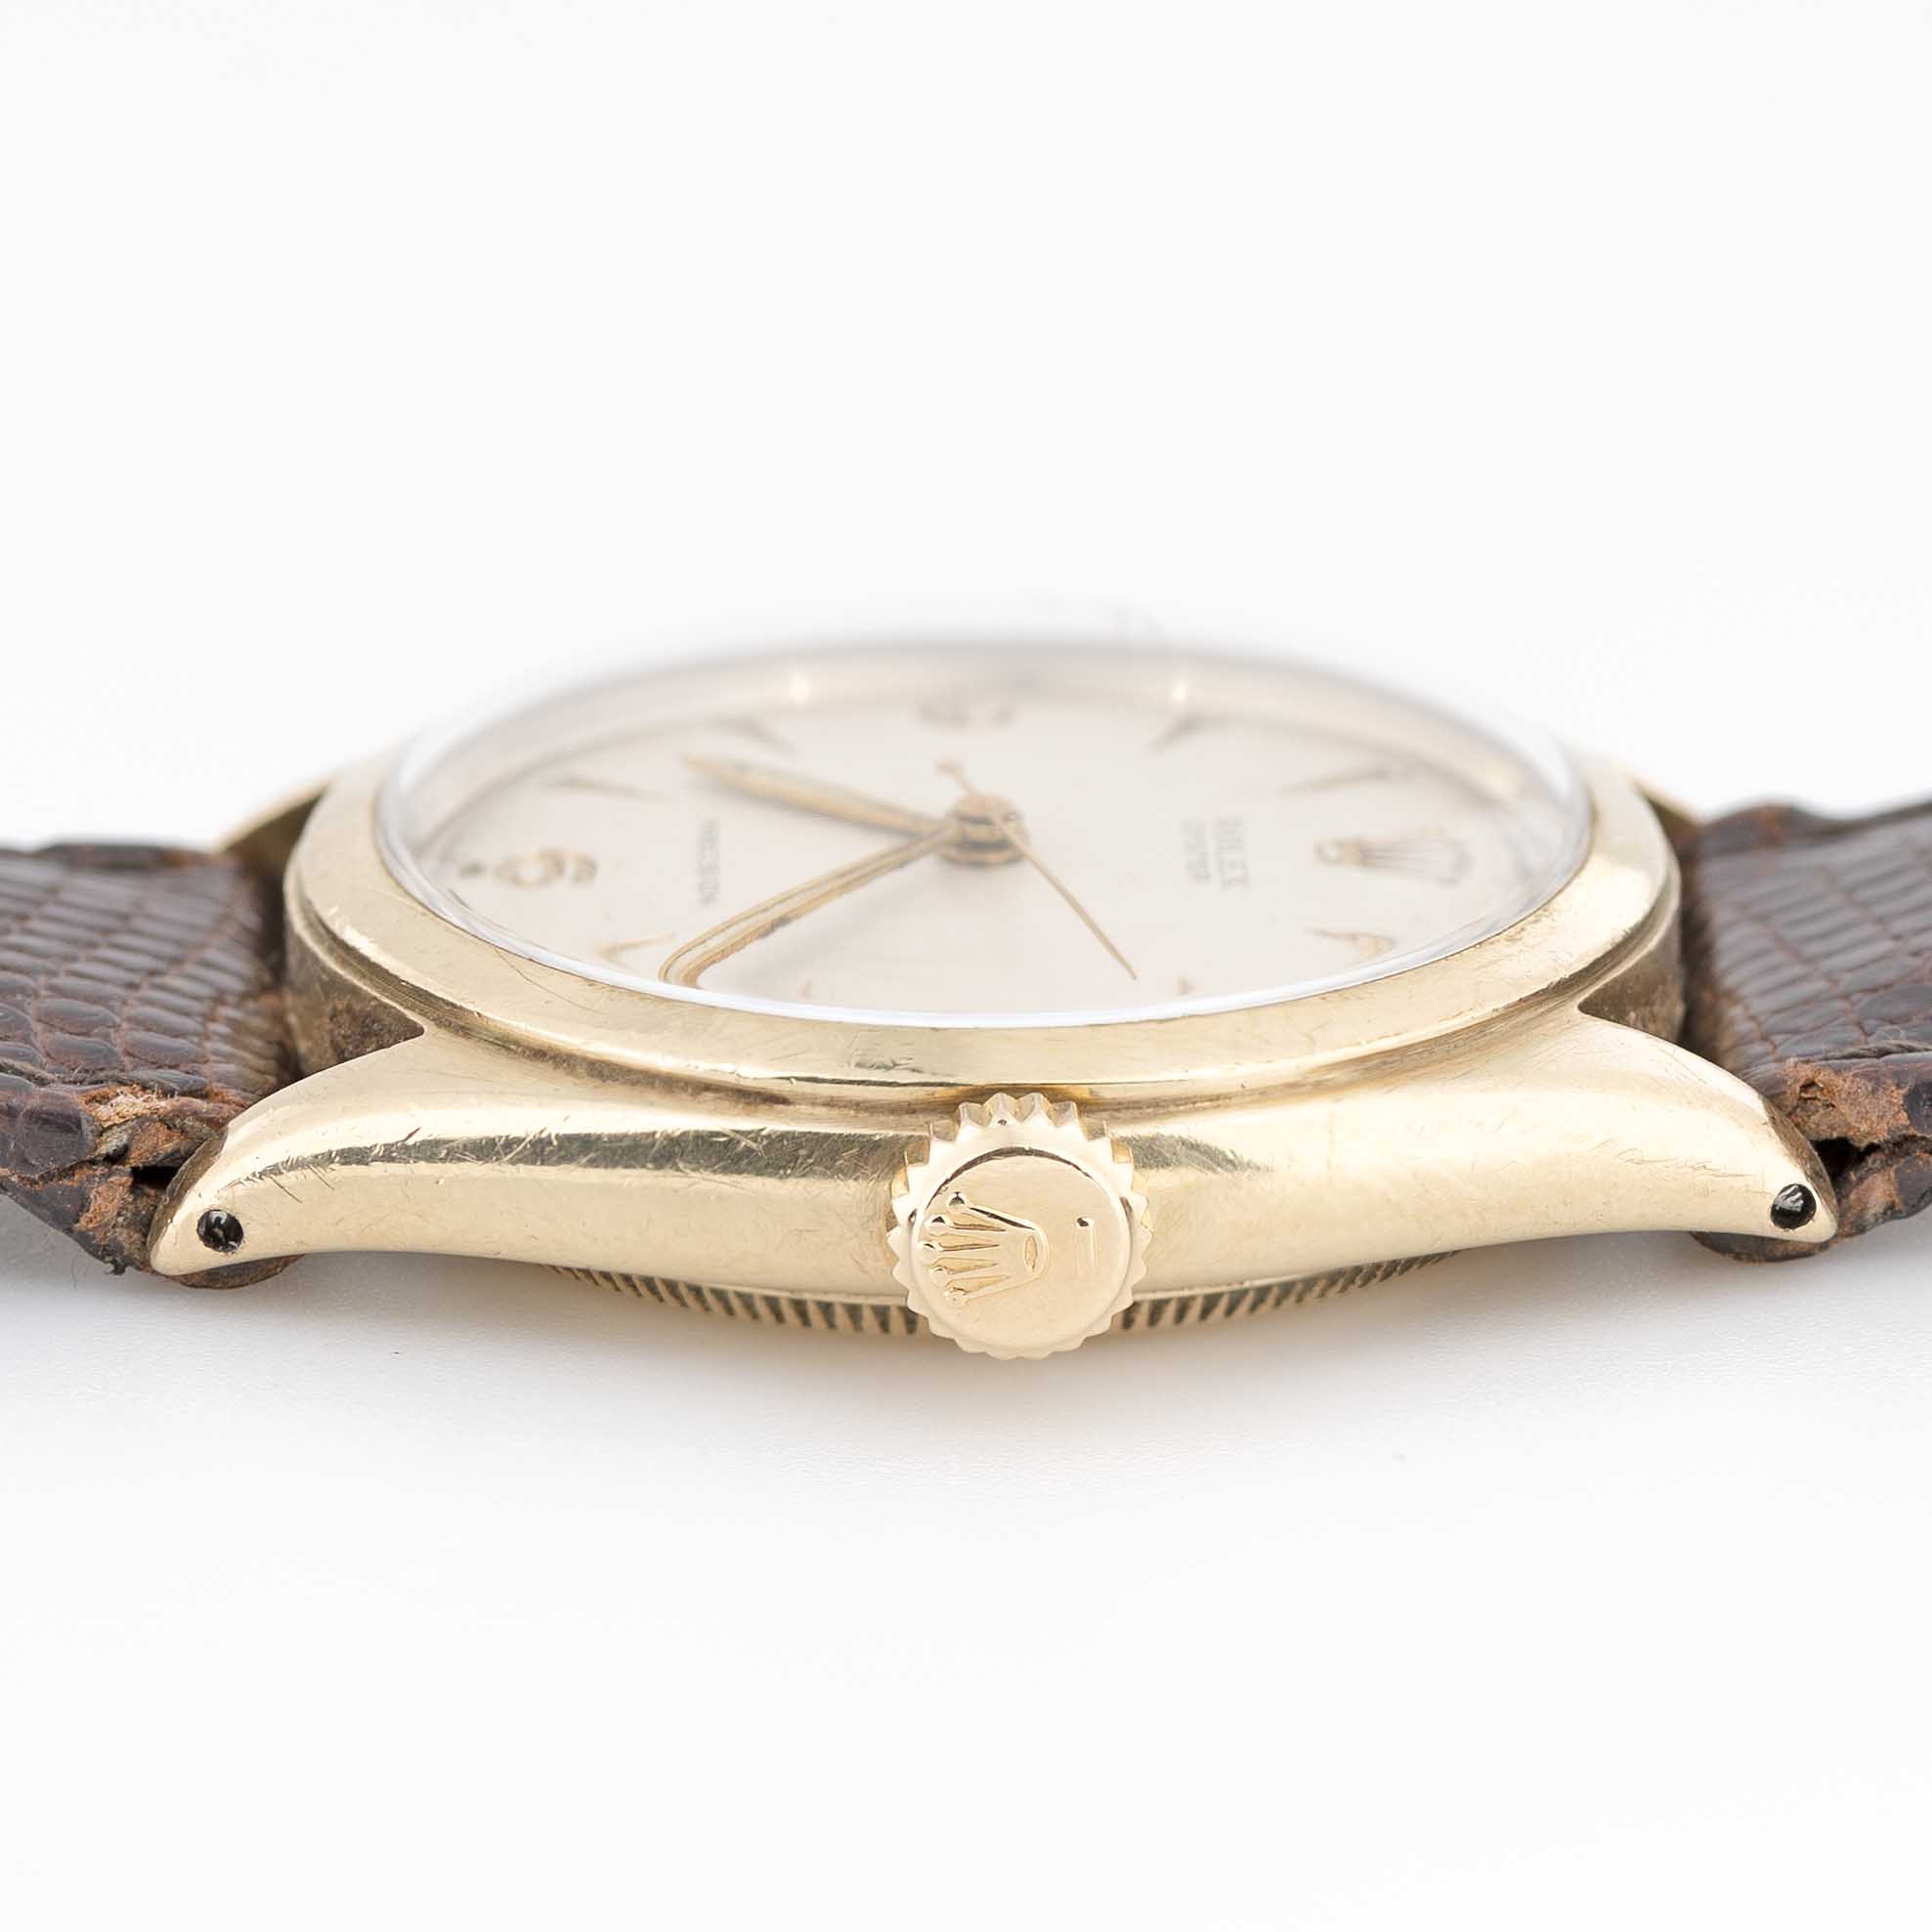 A RARE GENTLEMAN'S 10K SOLID GOLD ROLEX OYSTER PRECISION WRIST WATCH CIRCA 1952, REF. 6022 WITH 3- - Image 8 of 9